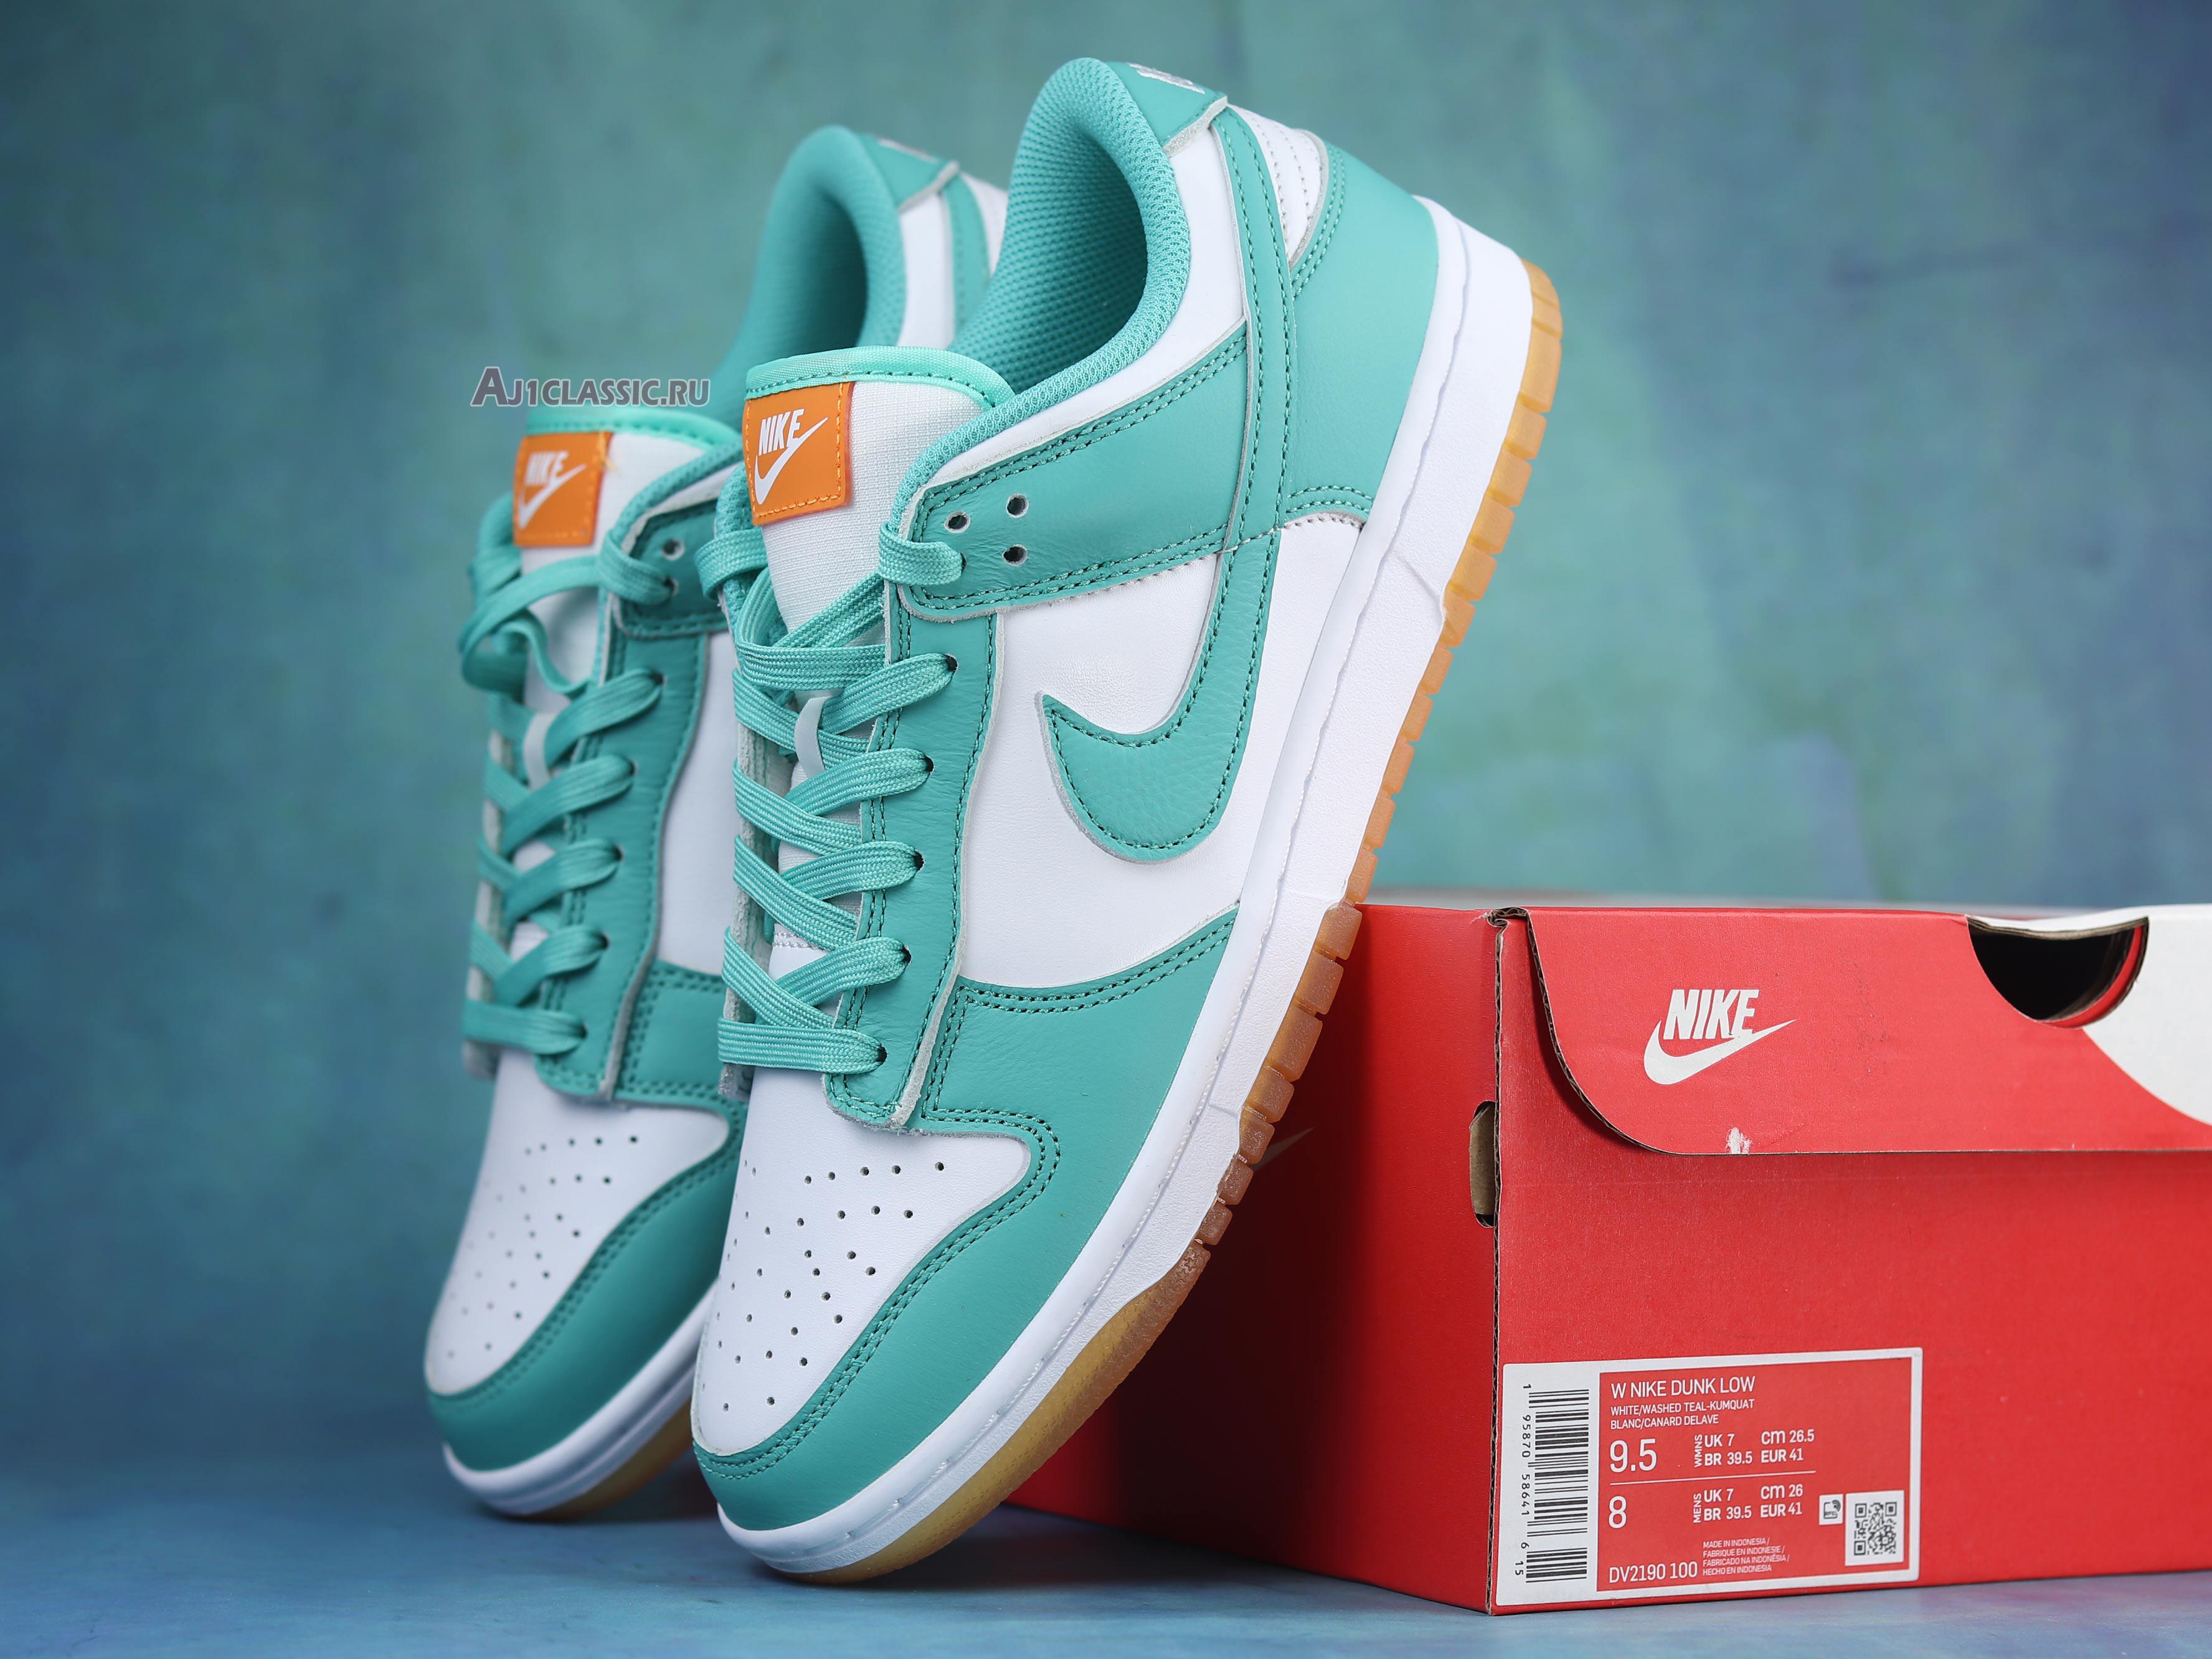 Nike Dunk Low Miami Dolphins DV2190-100 White/Washed Teal/Kumquat Sneakers